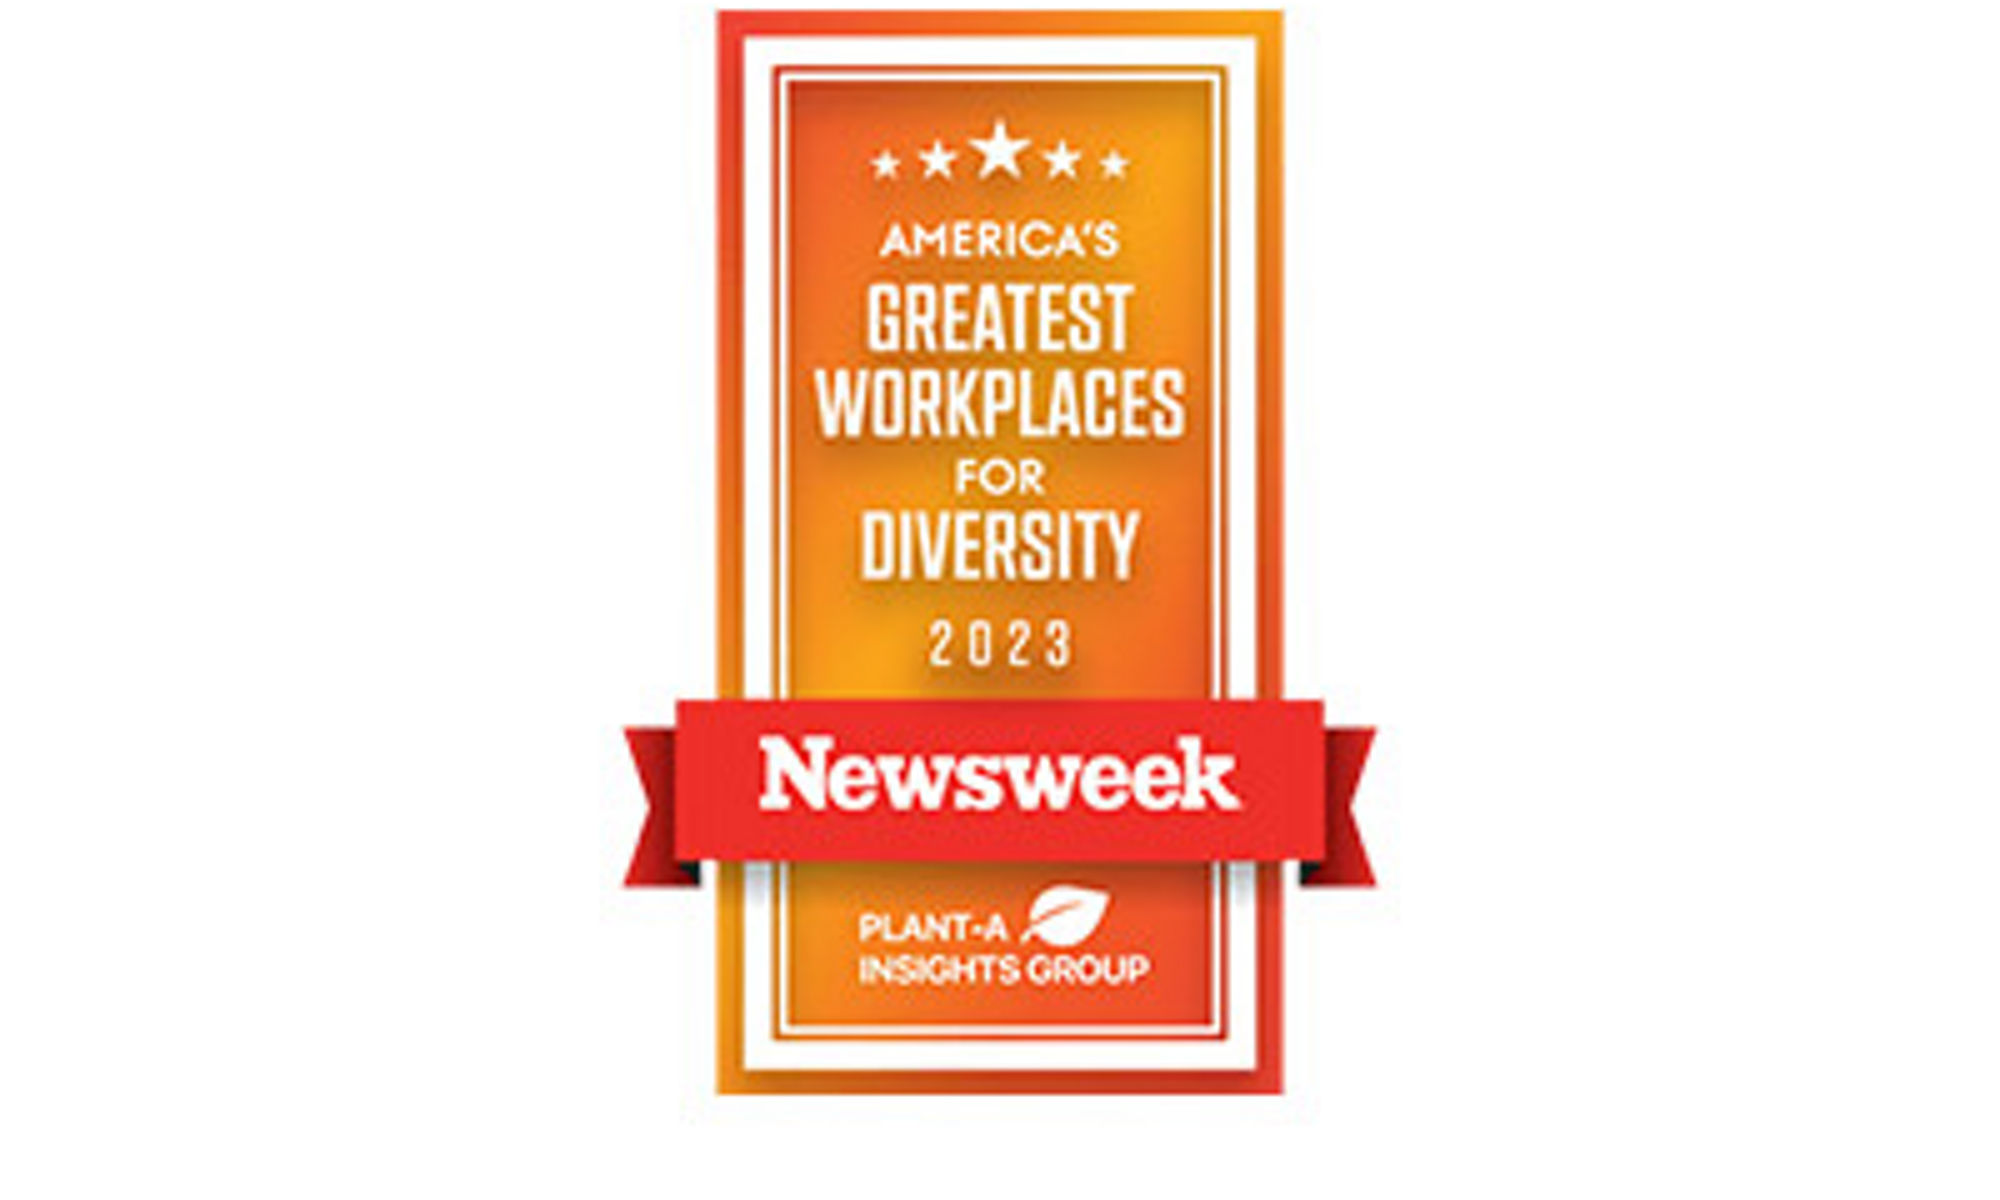 Newsweek Greatest Workplaces for Diversity award icon